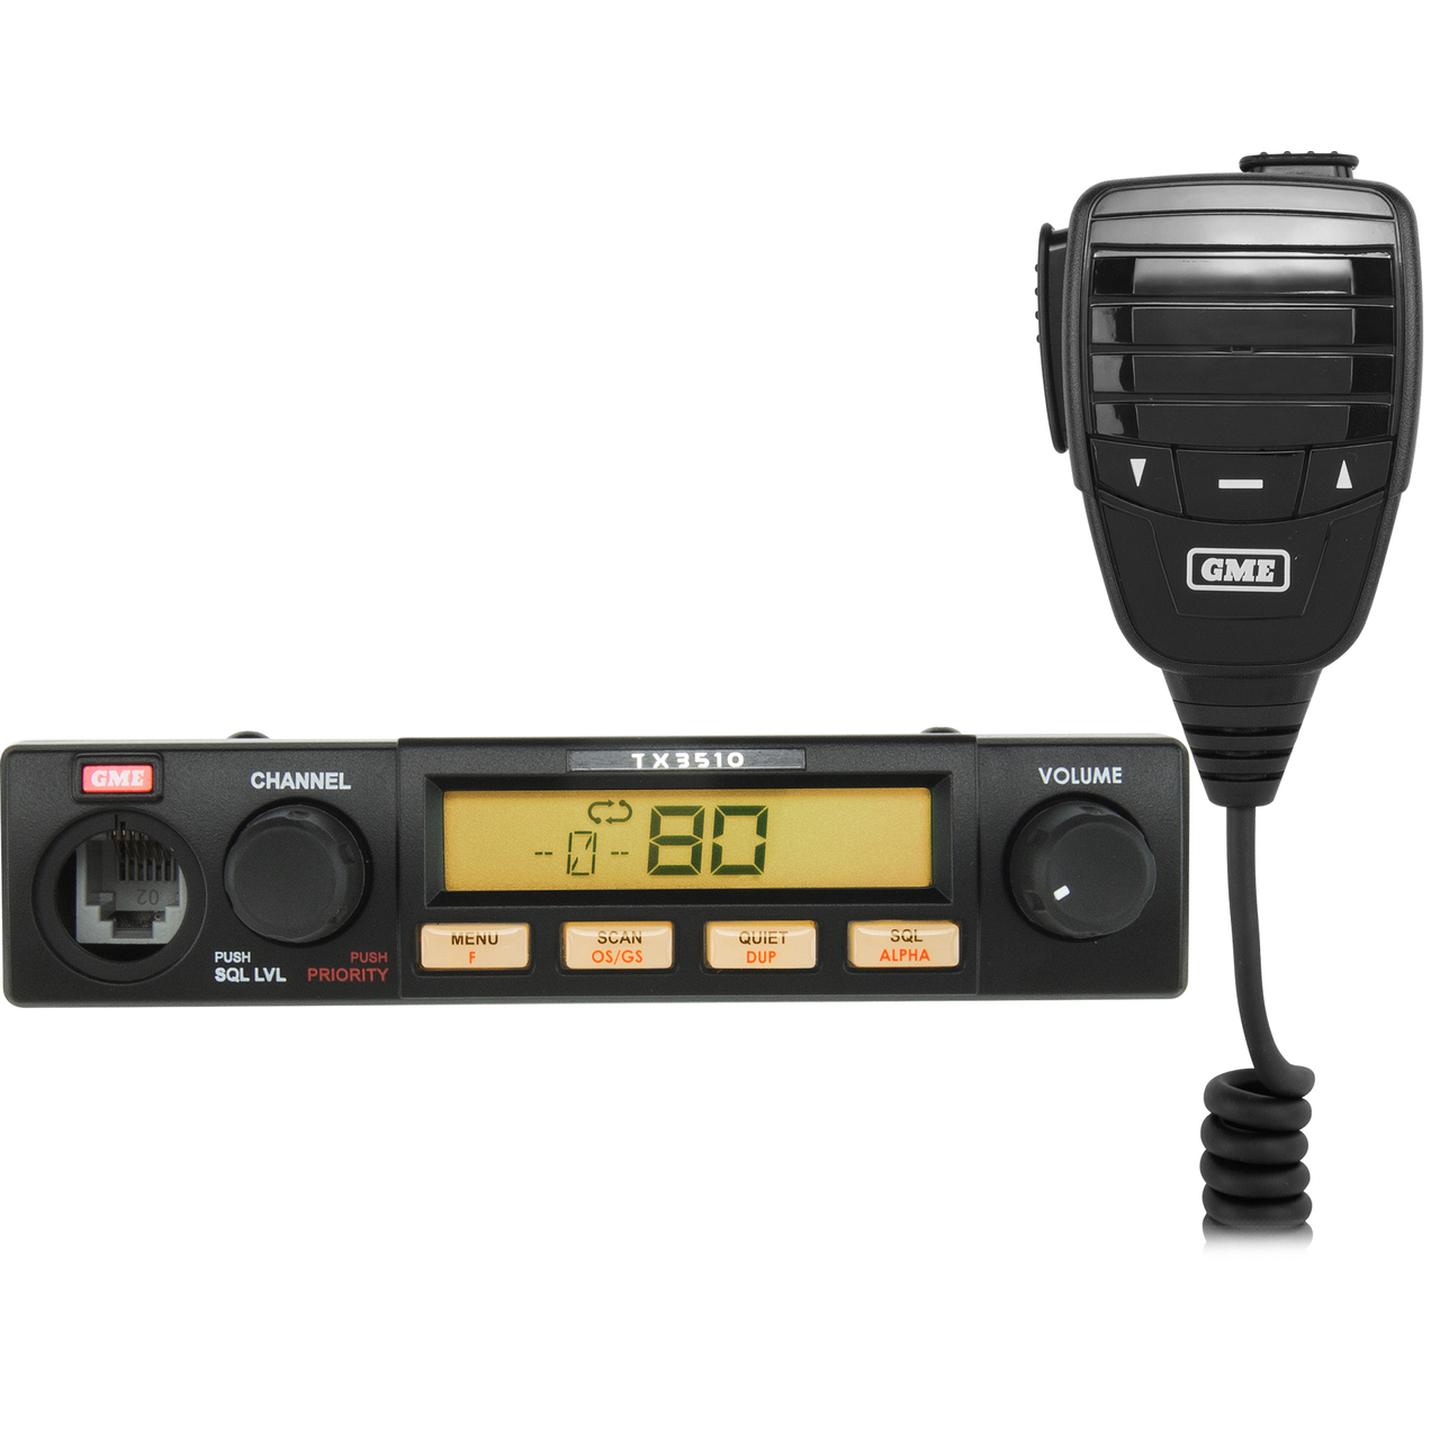 GME 5 Watt Compact UHF CB Radio with ScanSuite